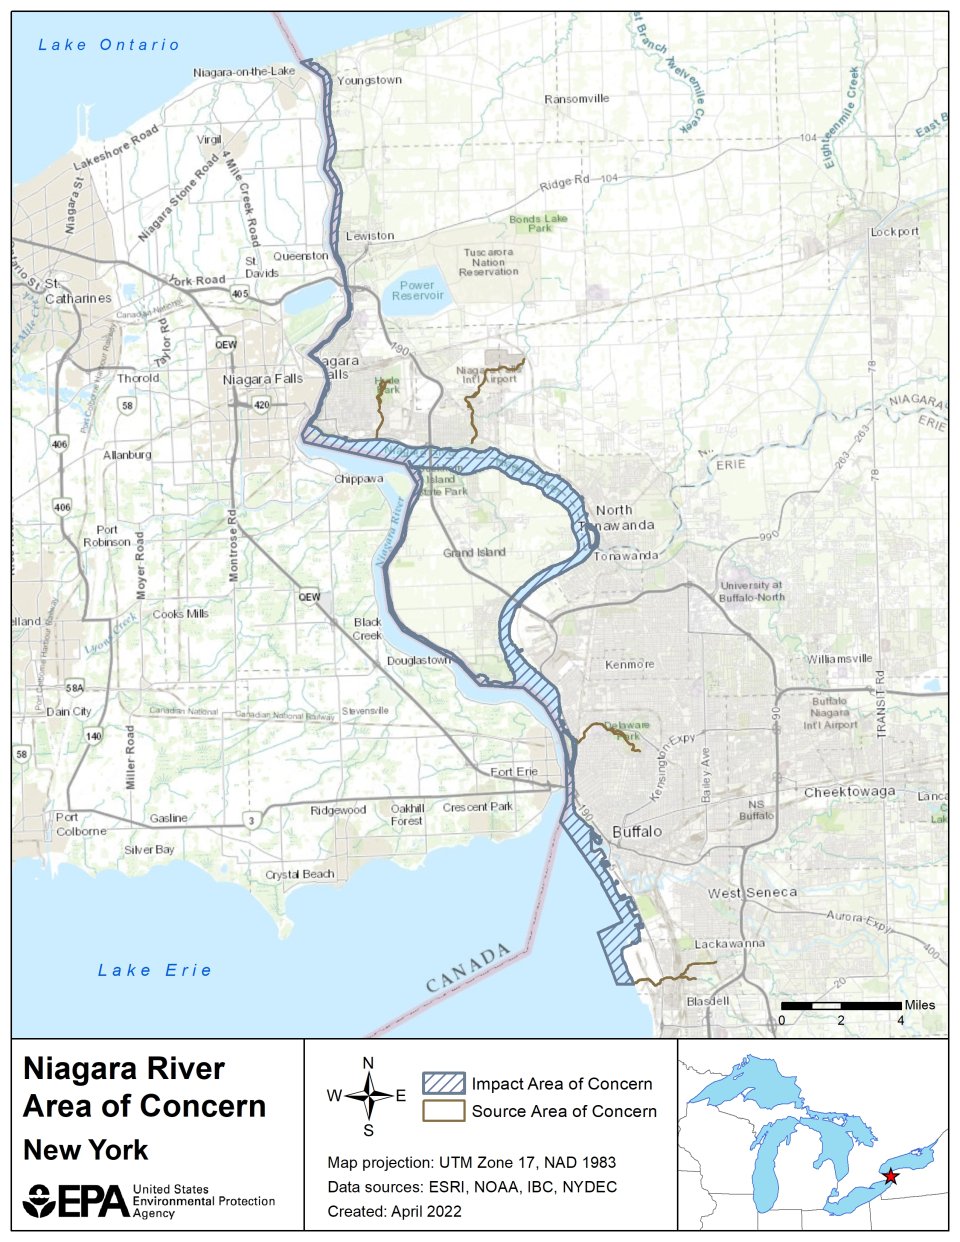 The Niagara River is a binational AOC that includes the entire Niagara River. The U.S. side of the AOC consists of an Impact AOC and a Source AOC. The Impact AOC extends from the mouth of Smoke Creek near the southern end of the Buffalo Outer Harbor (which is within Lake Erie) north to the mouth of the Niagara River at Lake Ontario. Within the river, the international border between Canada and the U.S. forms part of the Impact AOC boundary. On the landward side, the Impact AOC boundary follows the shoreline. In the Outer Harbor area, the in-water boundary generally follows the major breakwalls. In the southernmost section, where no breakwall is present, the AOC extends approximately one-half mile from shore